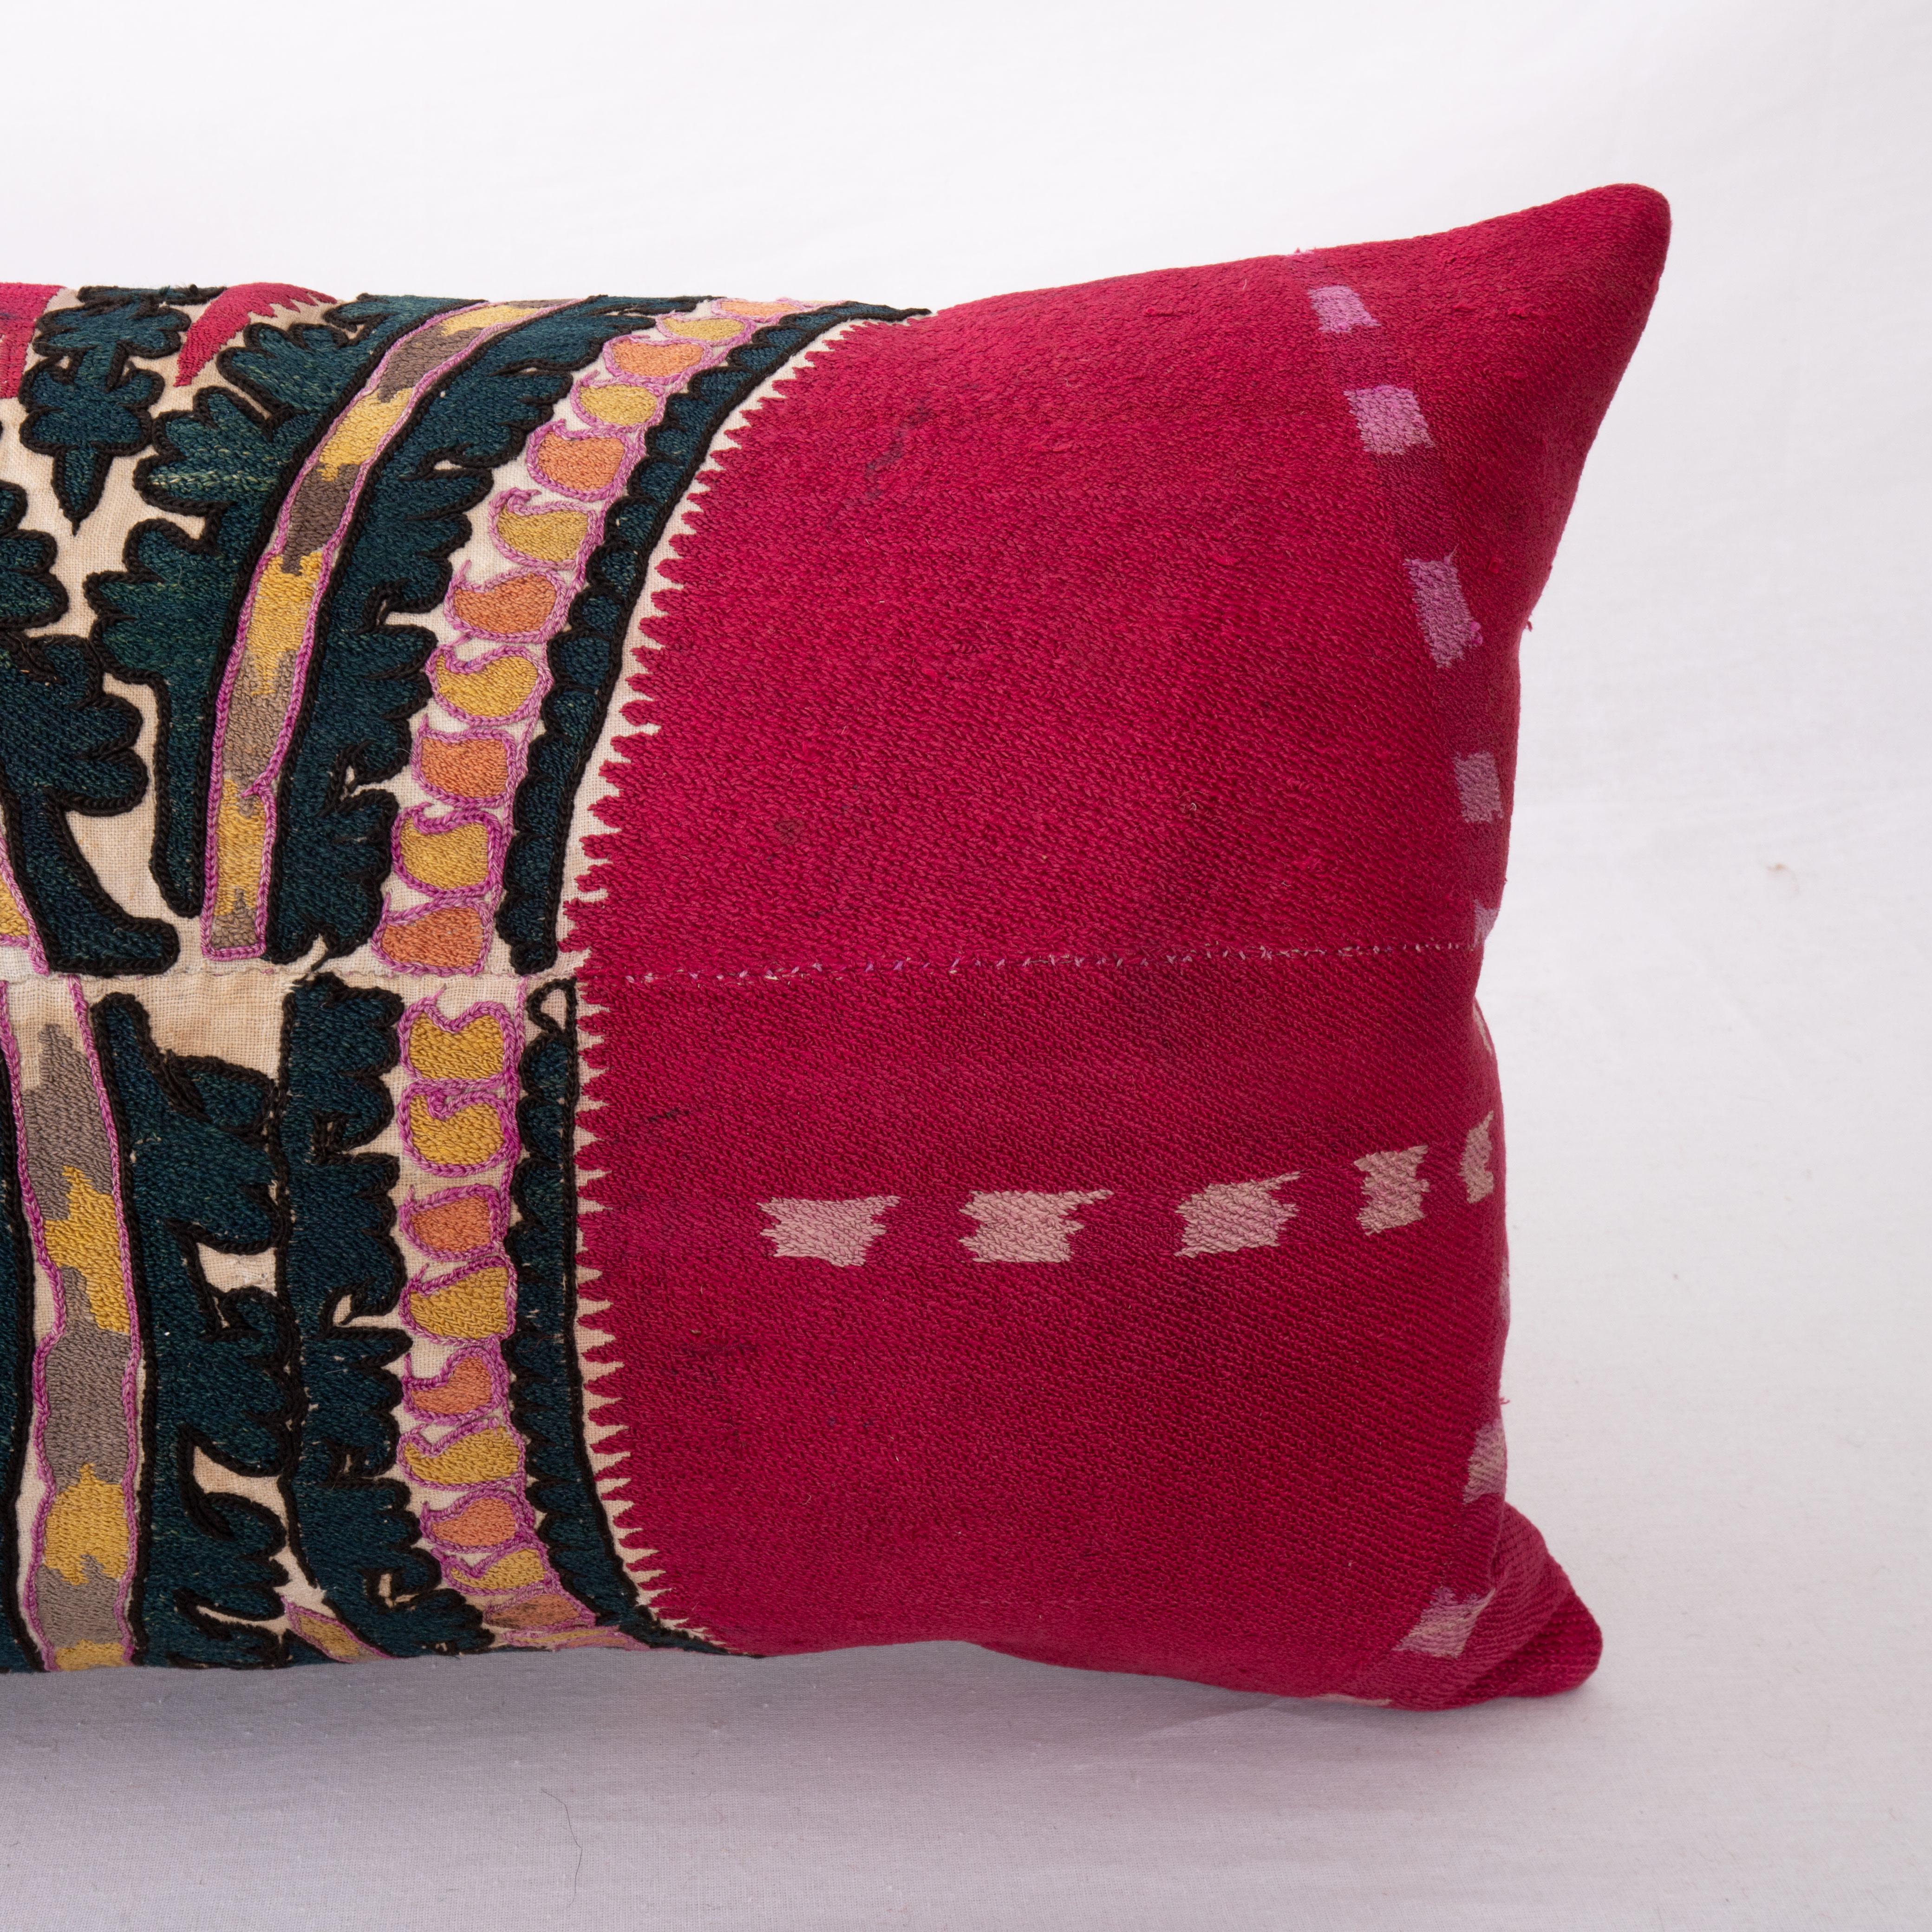 Embroidered Suzani Pillow Cover Made from Late 19th Century Tashkent Suzani